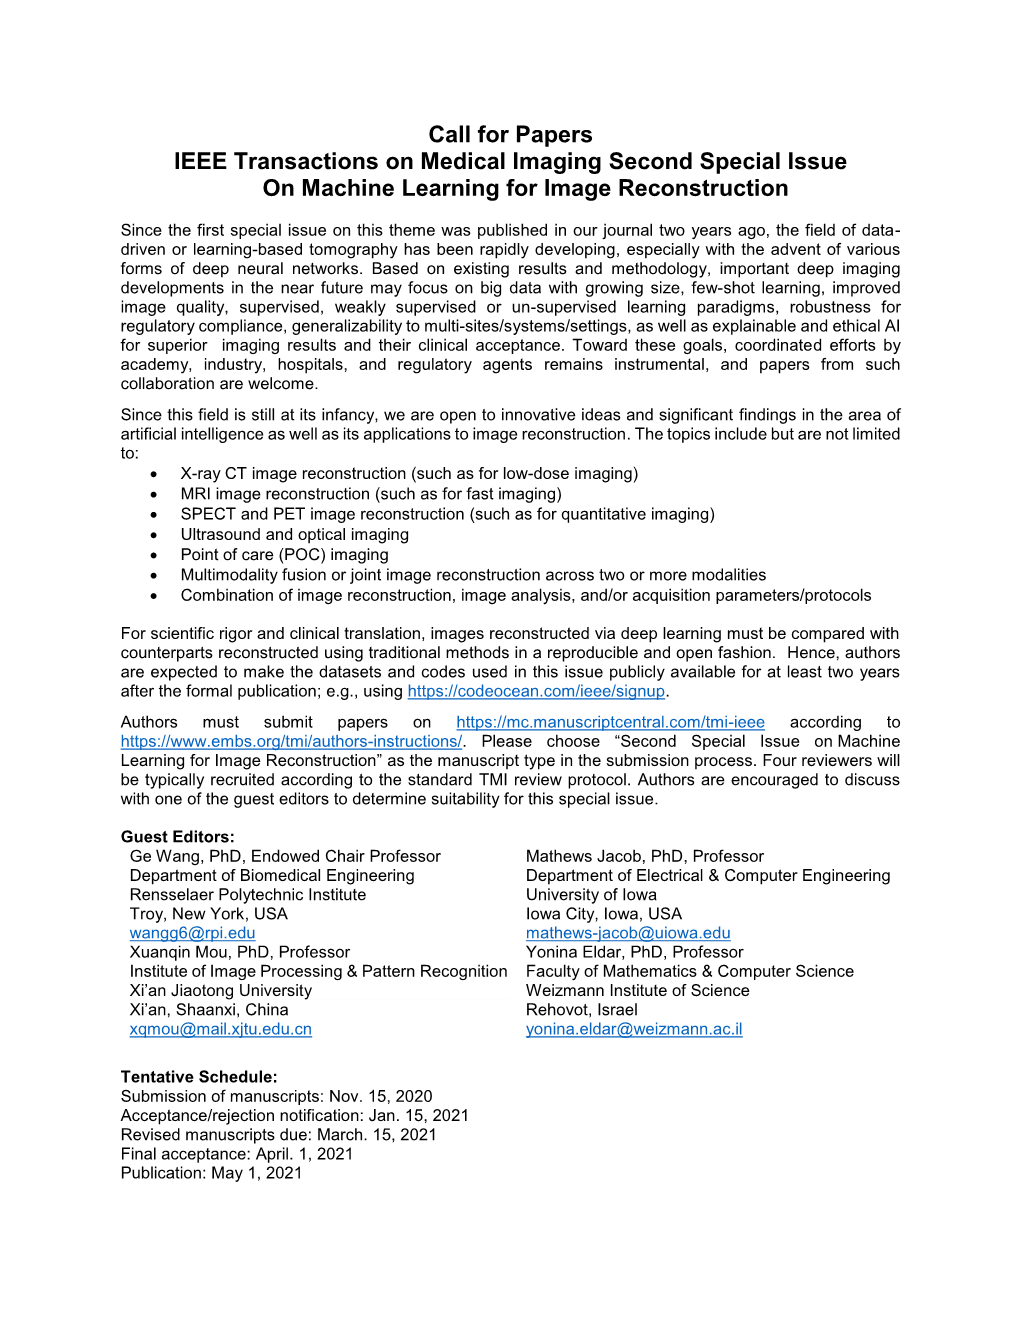 Call for Papers IEEE Transactions on Medical Imaging Second Special Issue on Machine Learning for Image Reconstruction